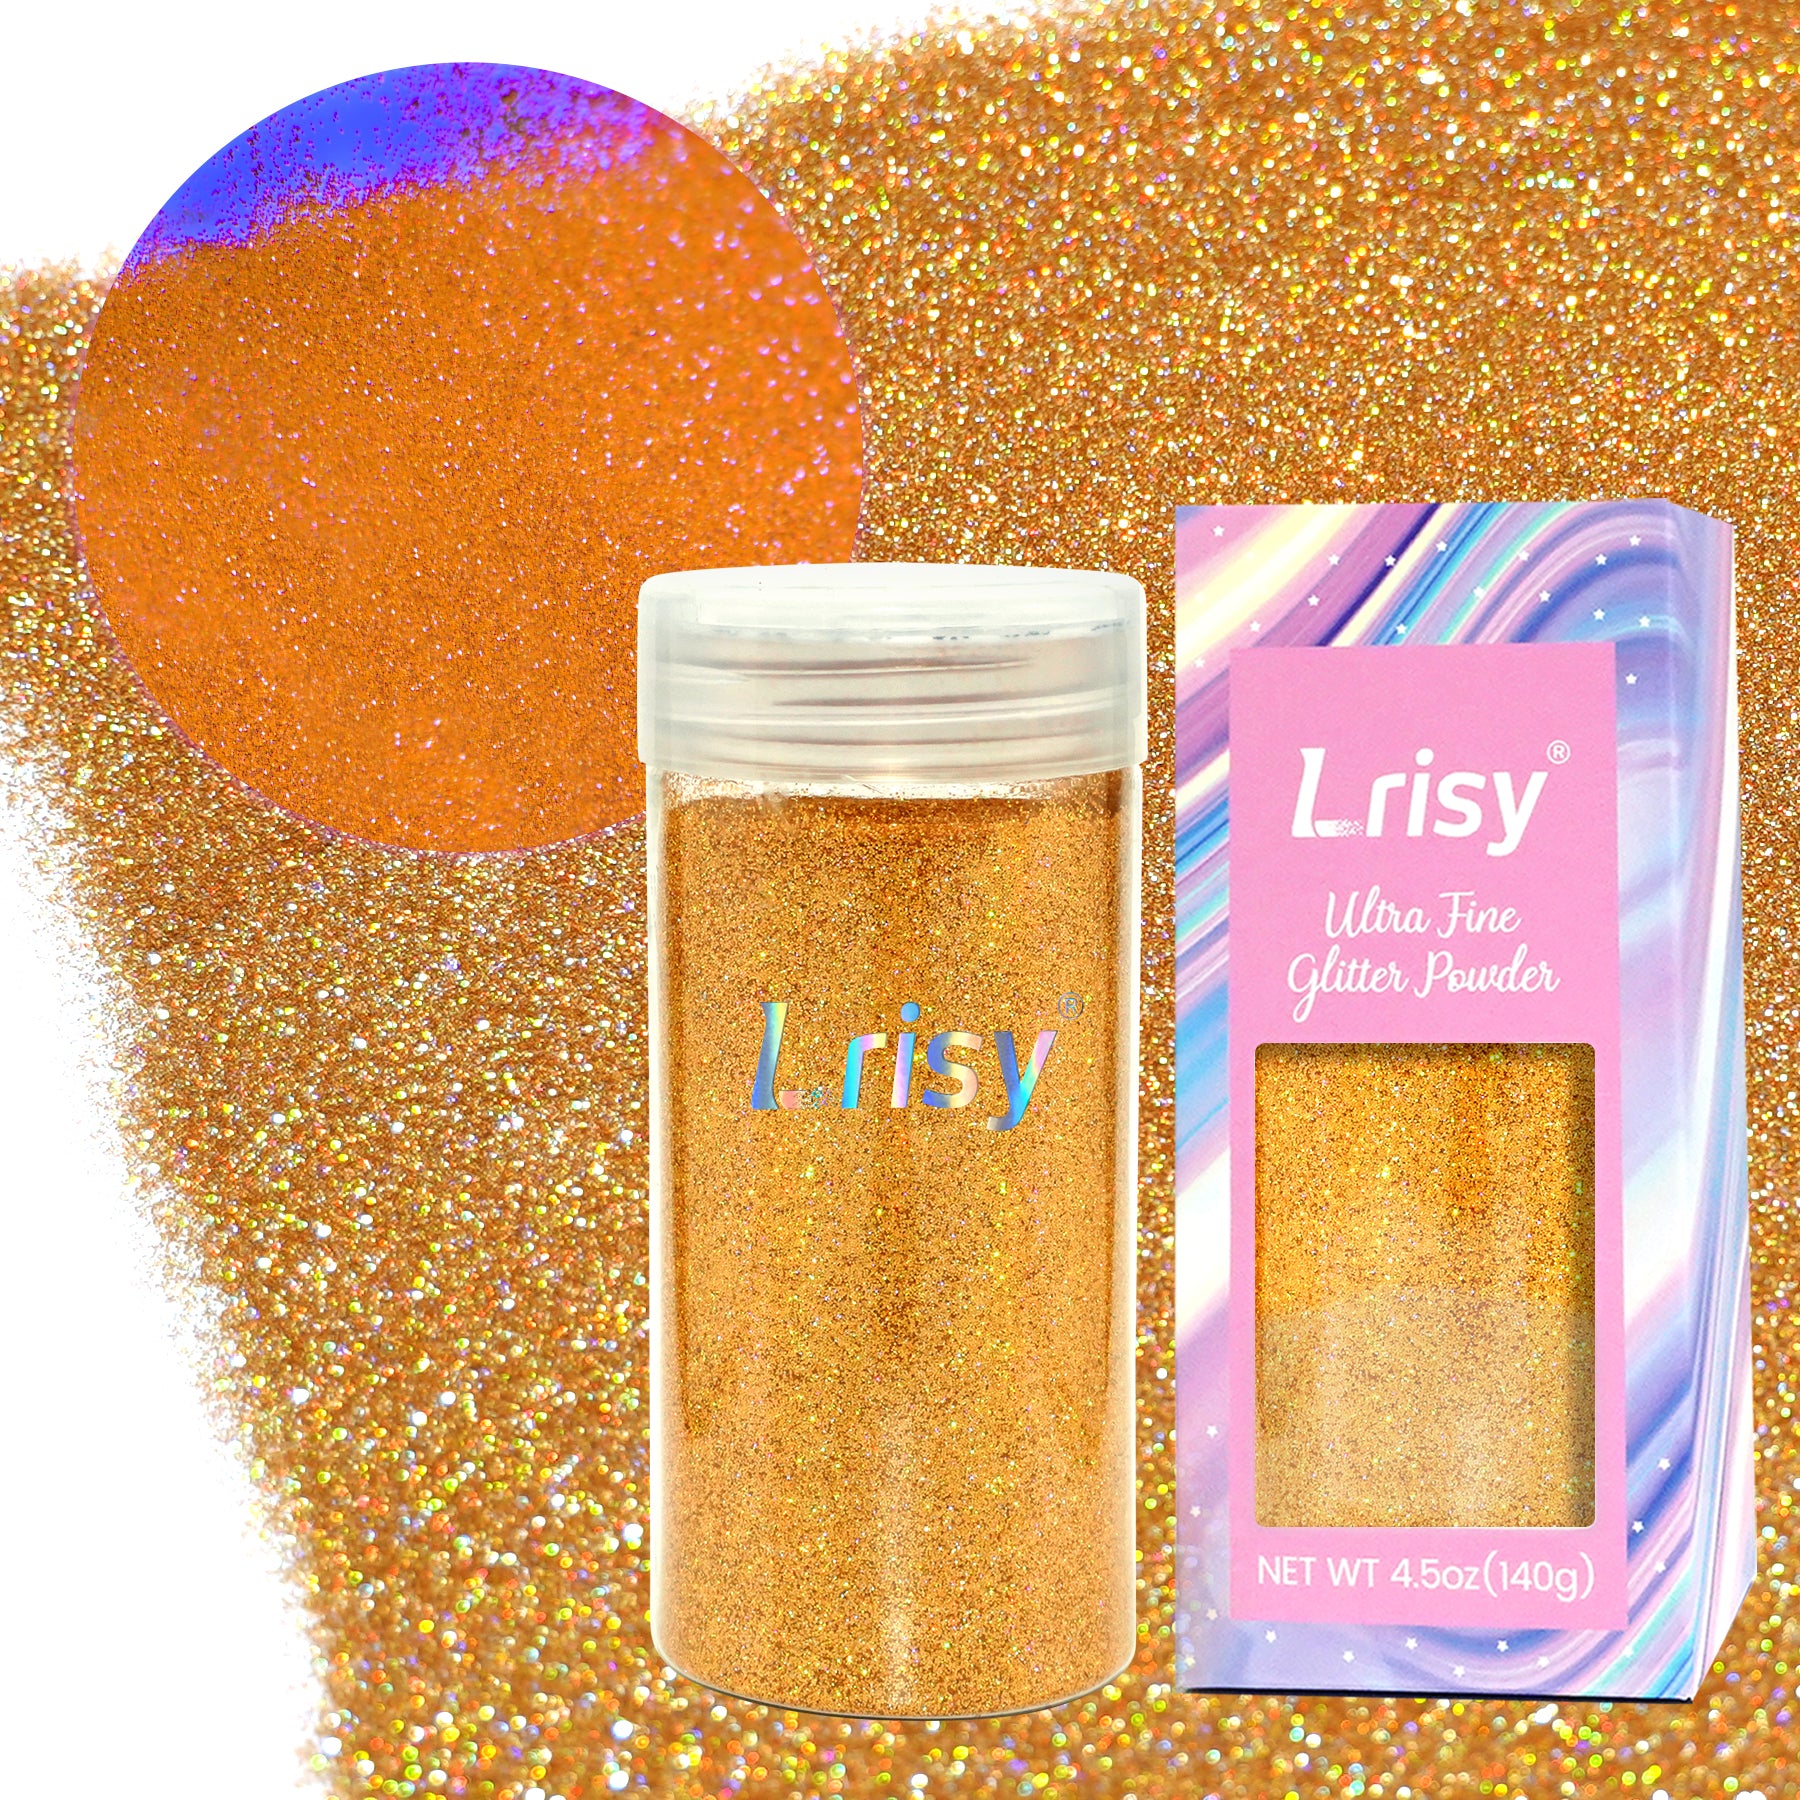 Lrisy Holographic Extra Fine Neon Punk Glitter Powder with Shaker Lid 140g/4.5oz (Holographic Gold)